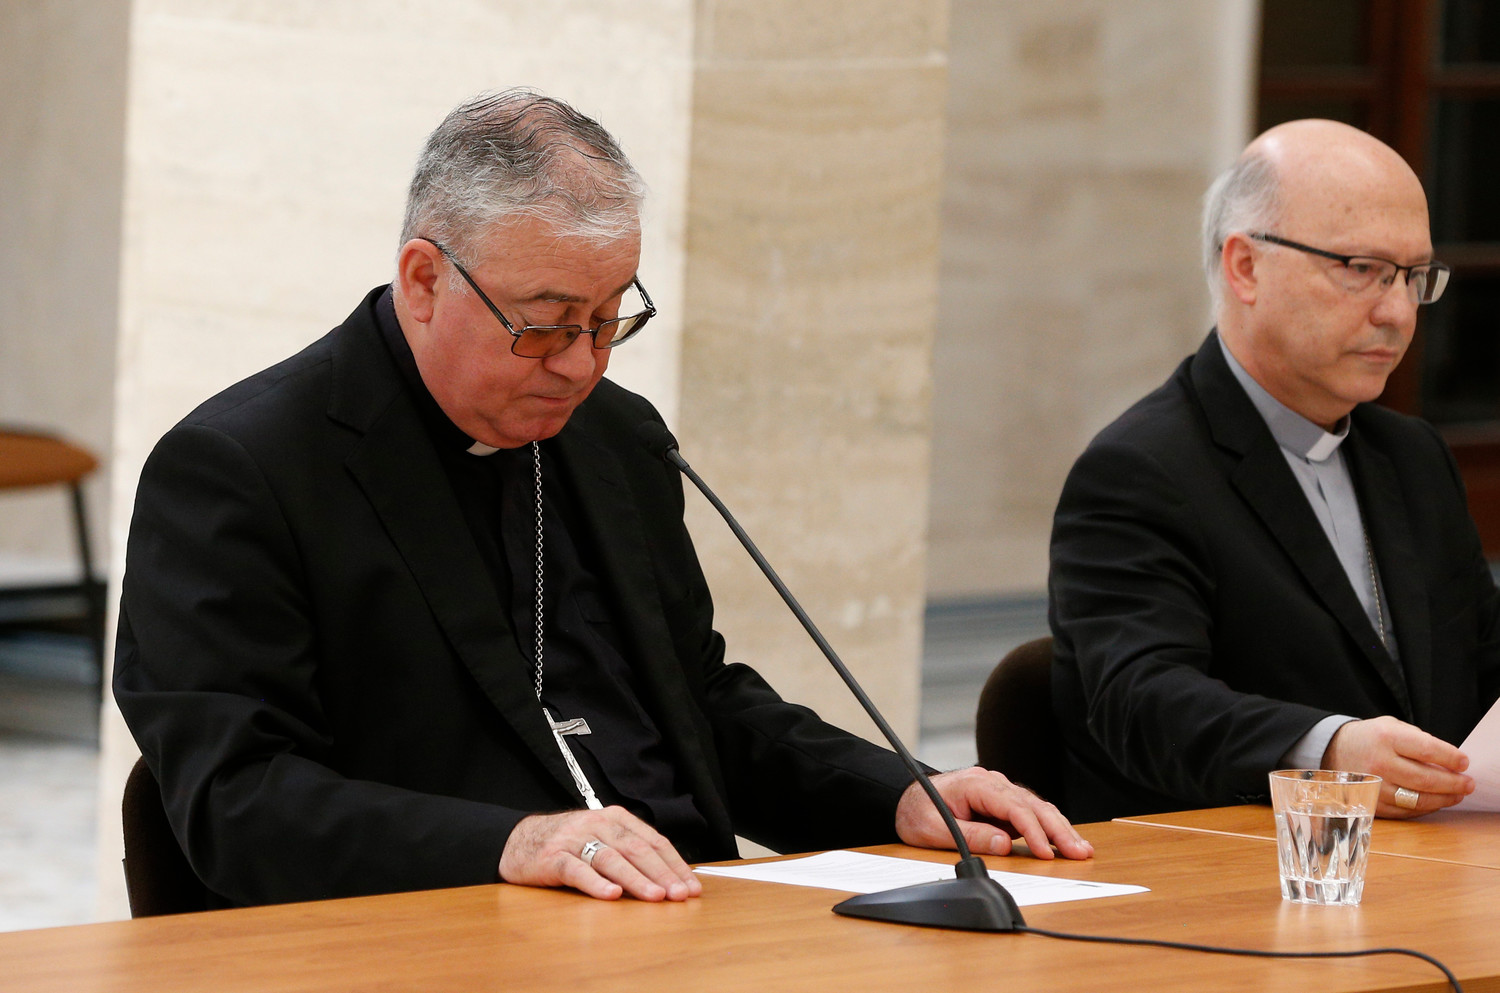 Bishop Juan Ignacio Gonzalez Errazuriz of San Bernardo, Chile, and Auxiliary Bishop Fernando Ramos Perez of Santiago, Chile, attend a press conference in Rome May 18. Bishop Gonzalez said every bishop in Chile offered his resignation to Pope Francis after a three-day meeting with him at the Vatican.